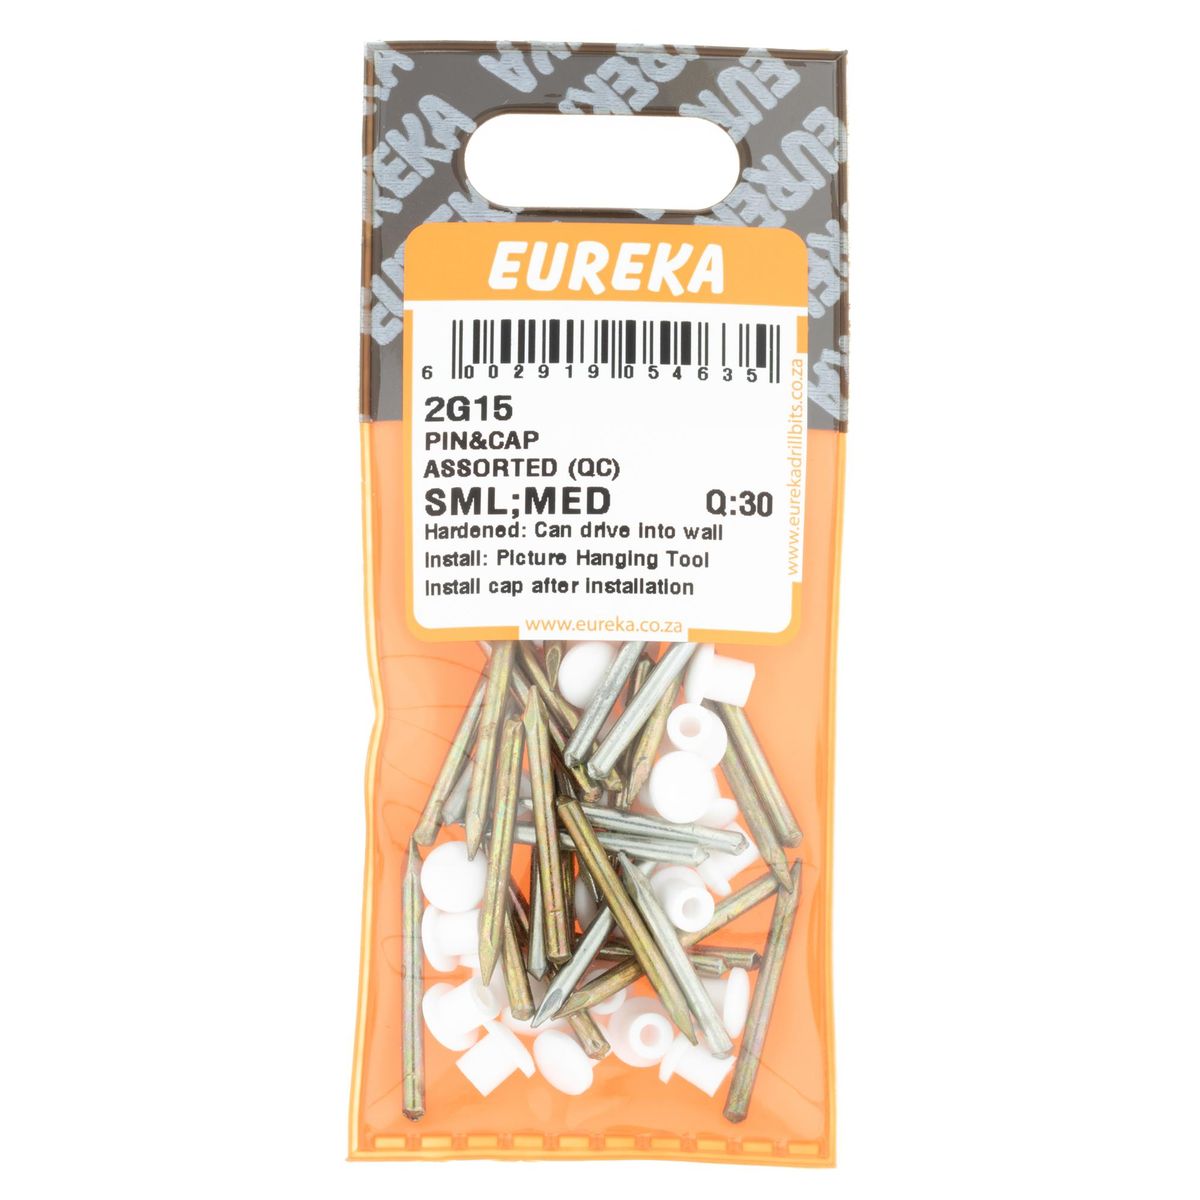 Eureka Assorted Pin And Cap Small And Medium Q30 2g15 Shop Today Get It Tomorrow 